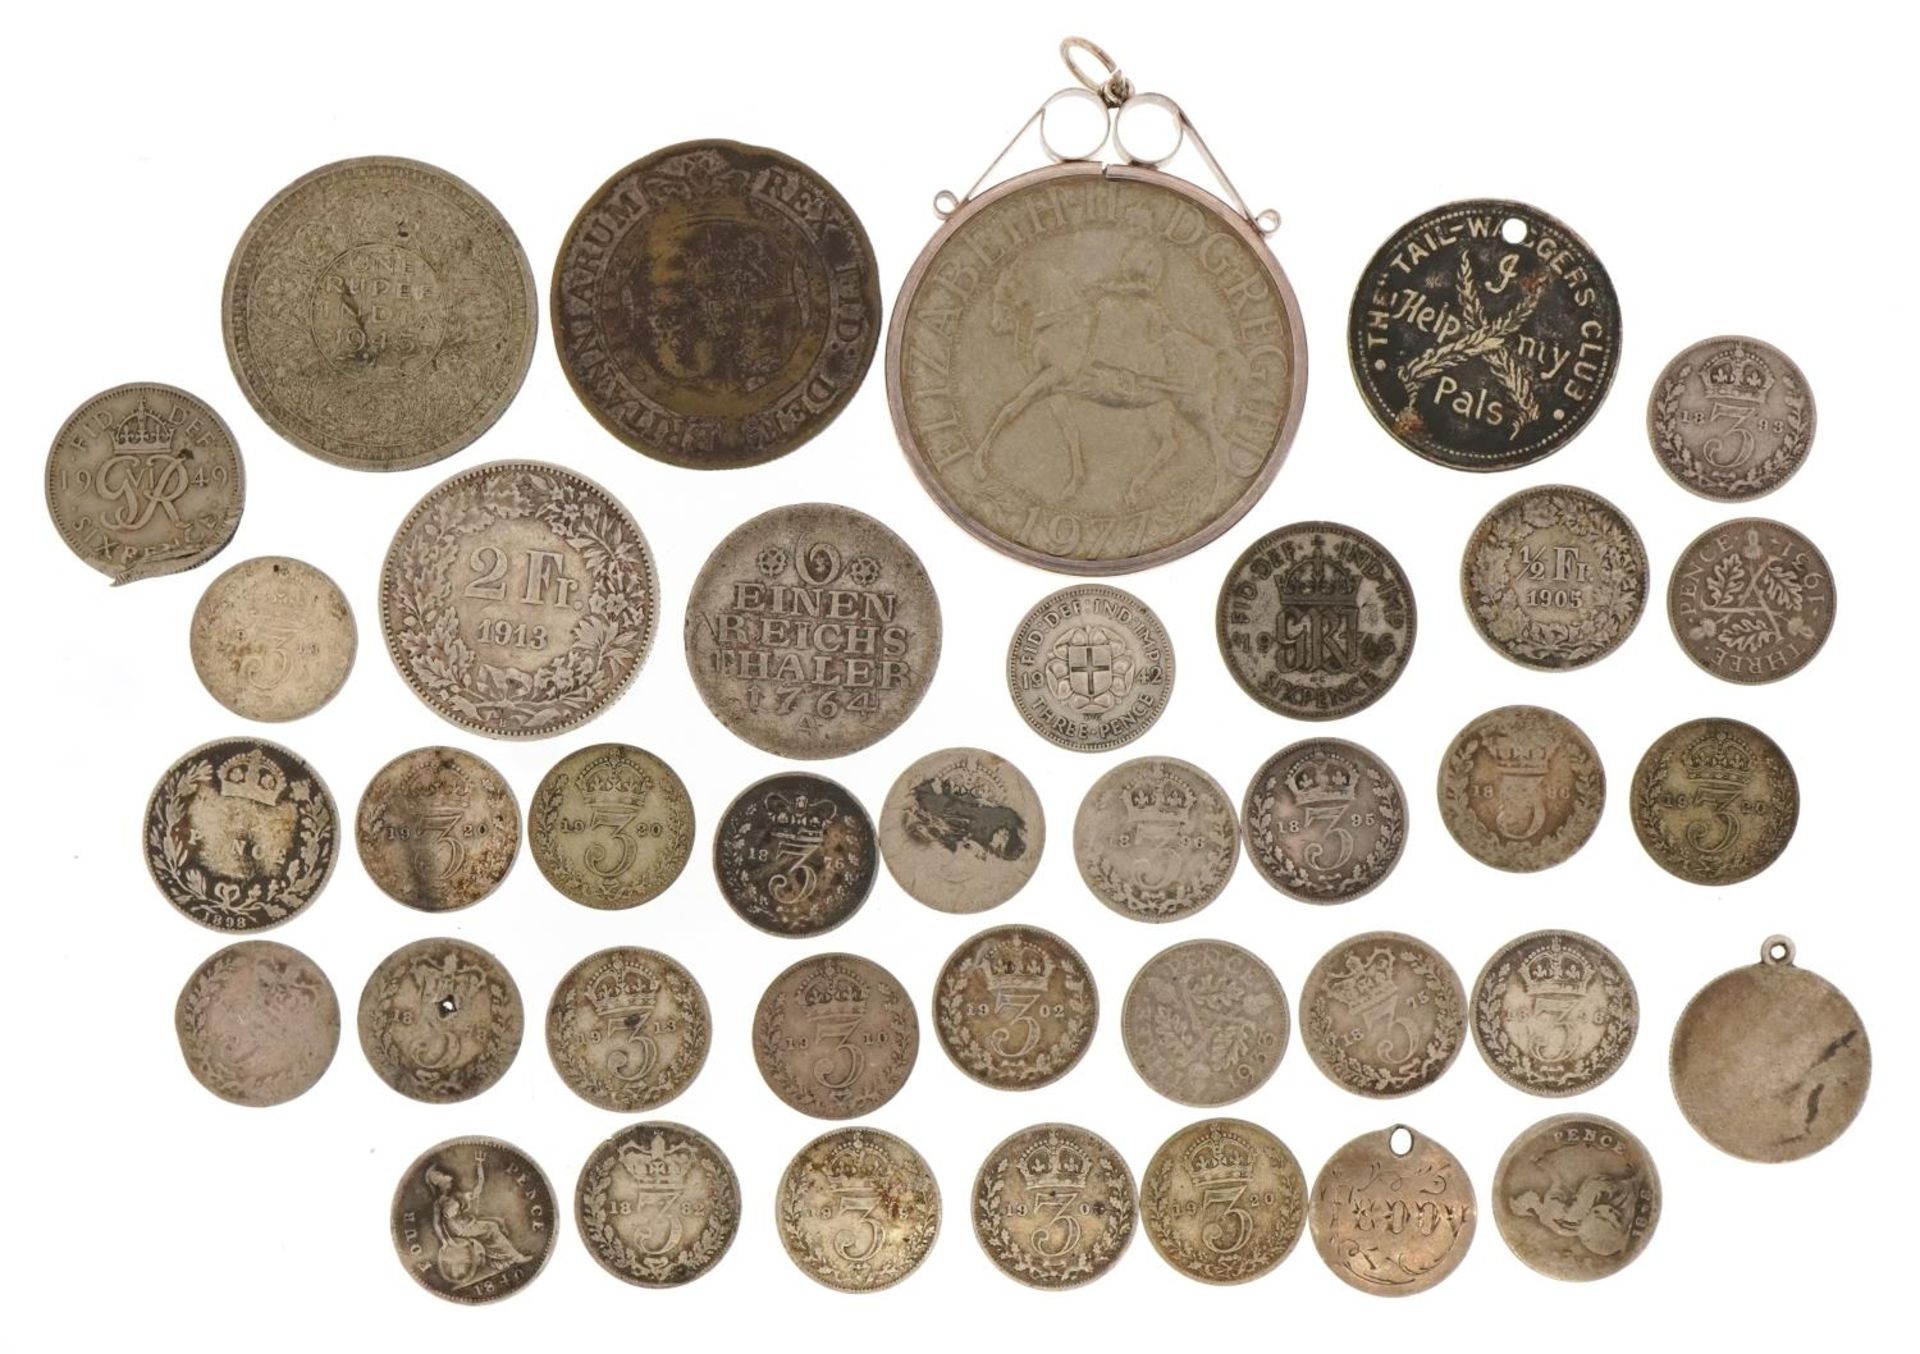 Antique and later British and world coinage, some silver, including 1977 commemorative crown with